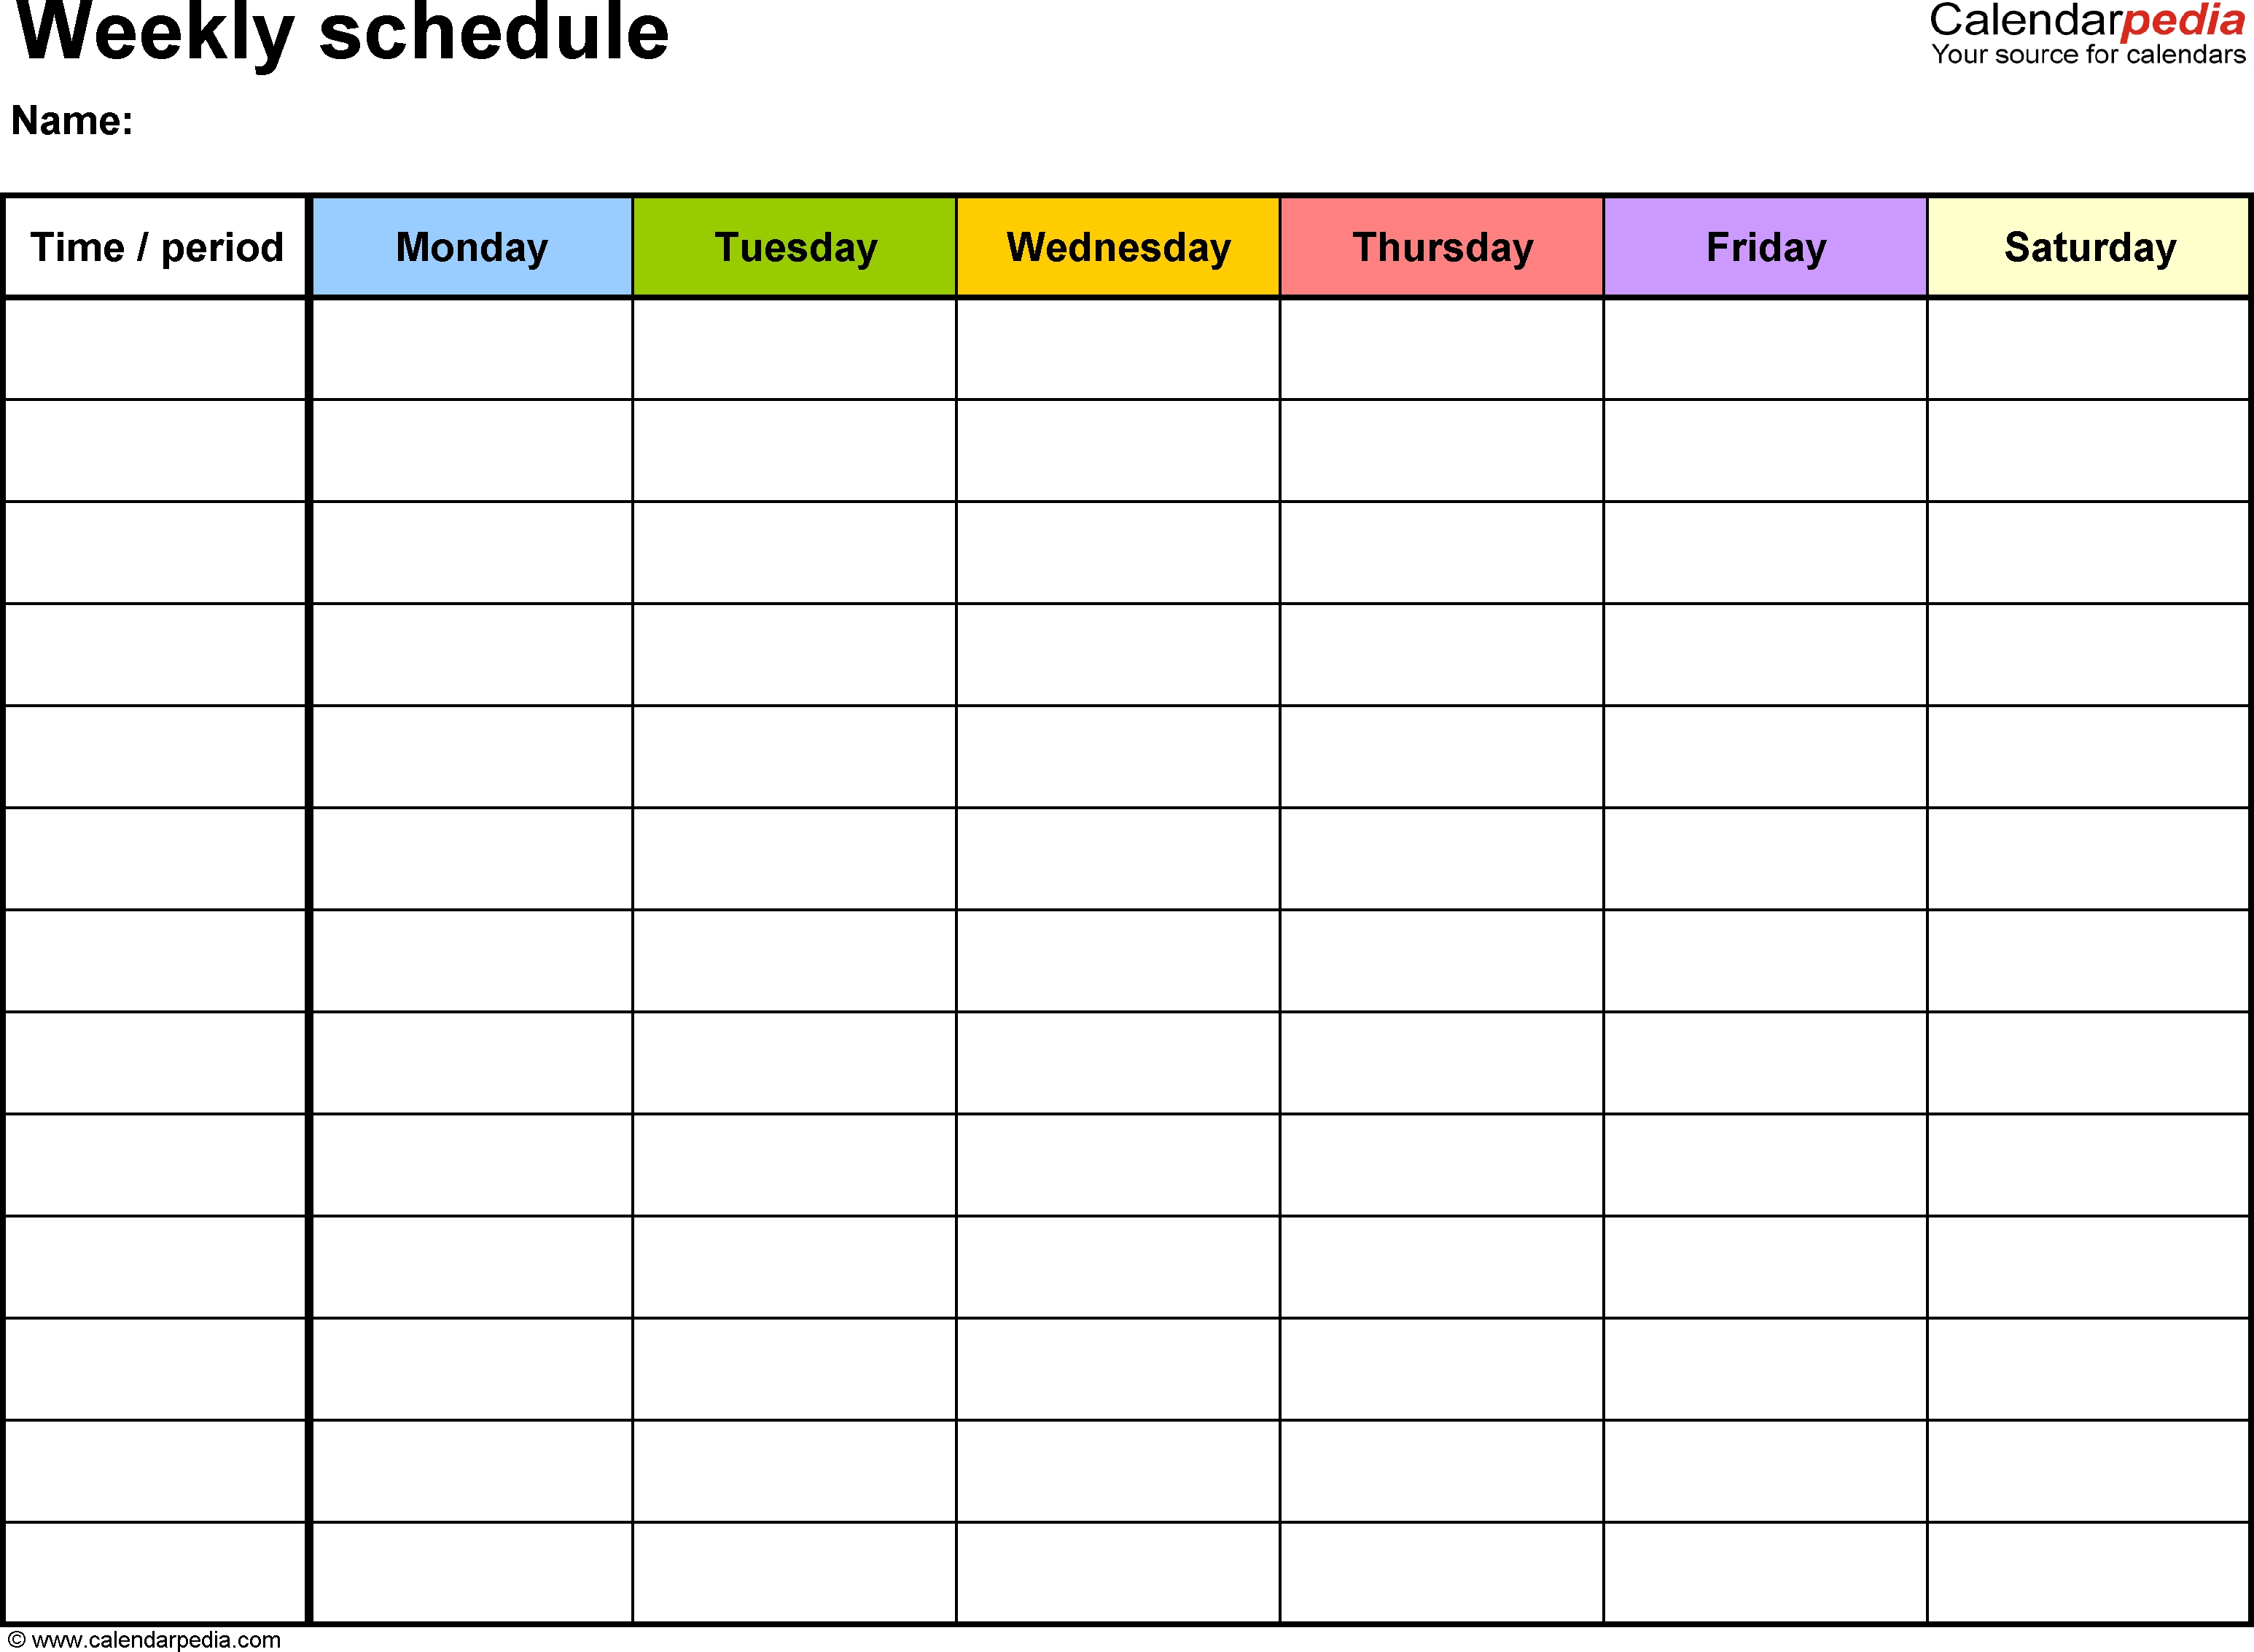 Free Weekly Schedule Templates For Word - 18 Templates with regard to Weekly Calendar Template Monday Thru Friday